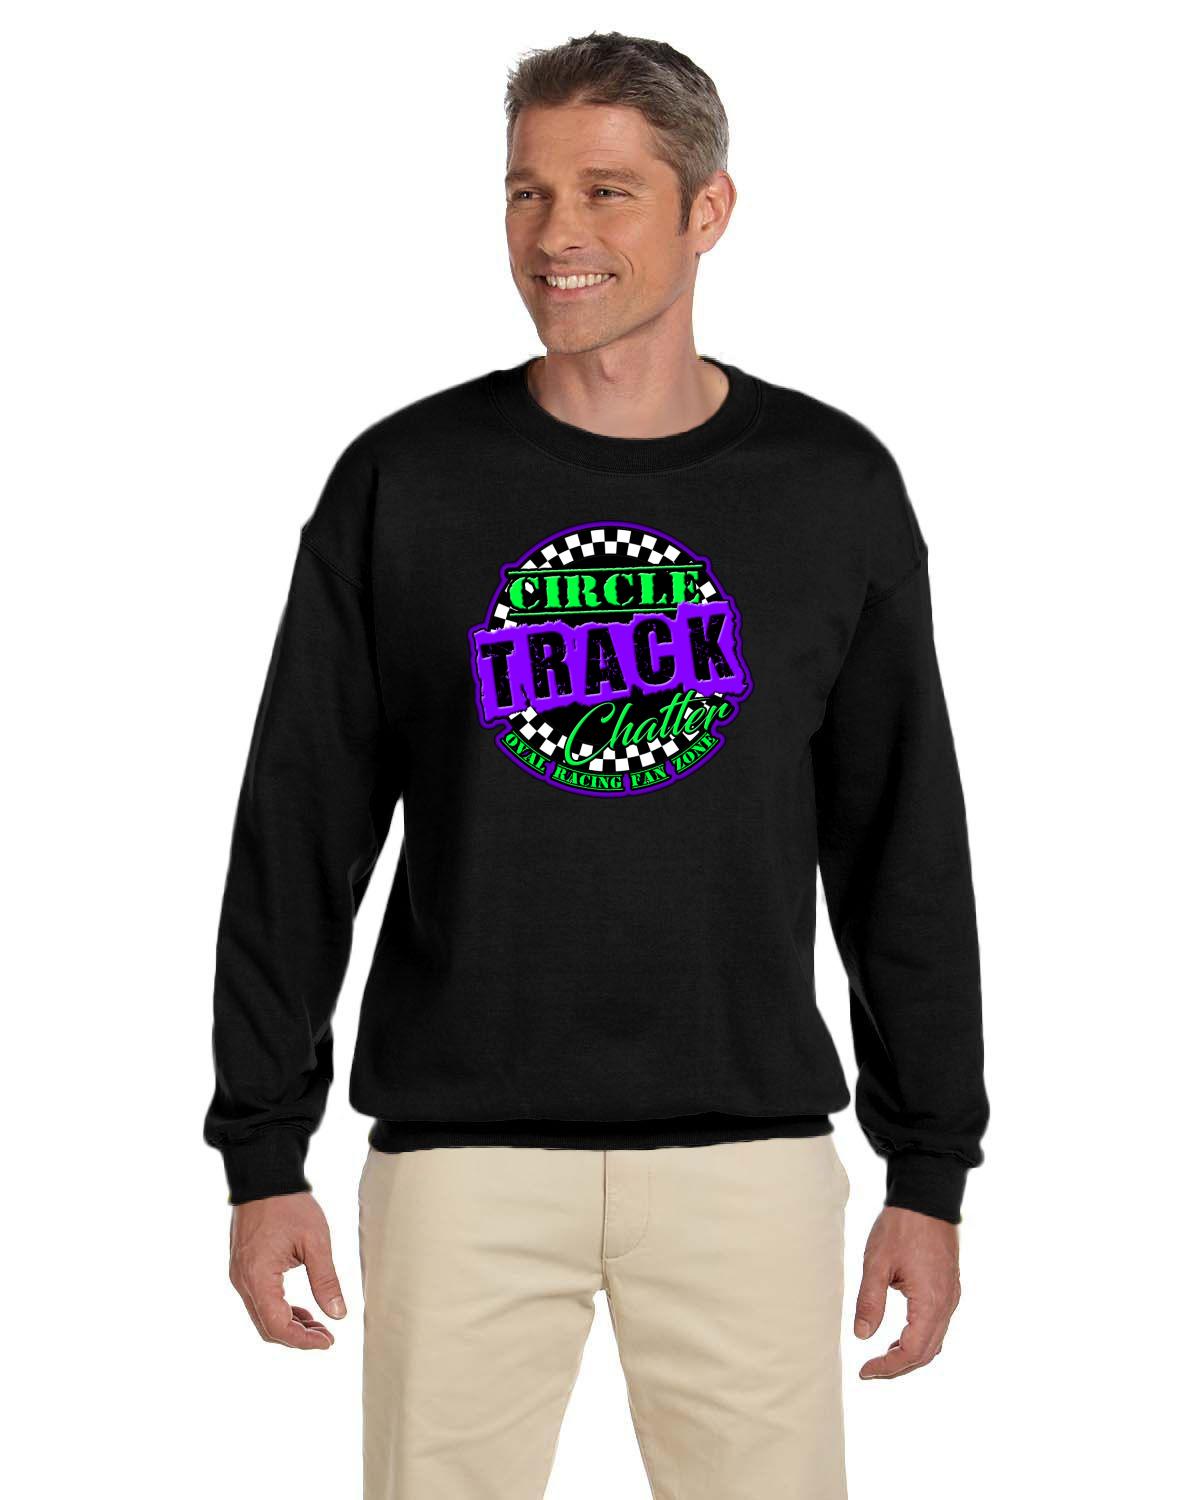 Circle Track Chatter Adult Fleece Crew Sweater